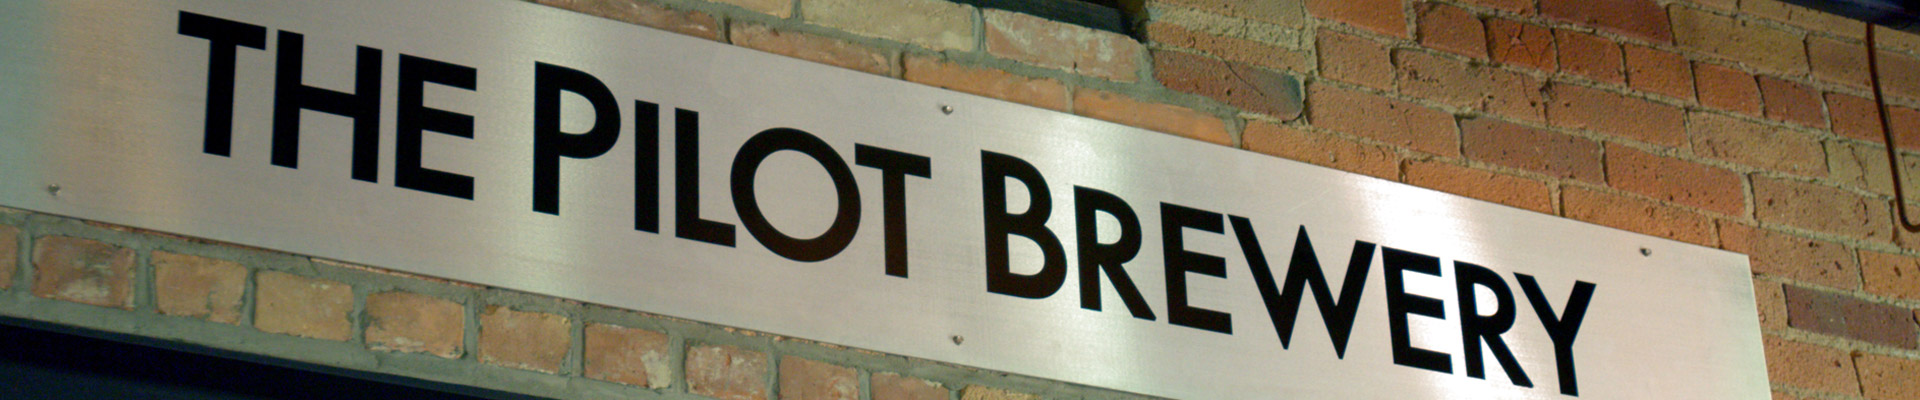 The Pilot Brewery Sign